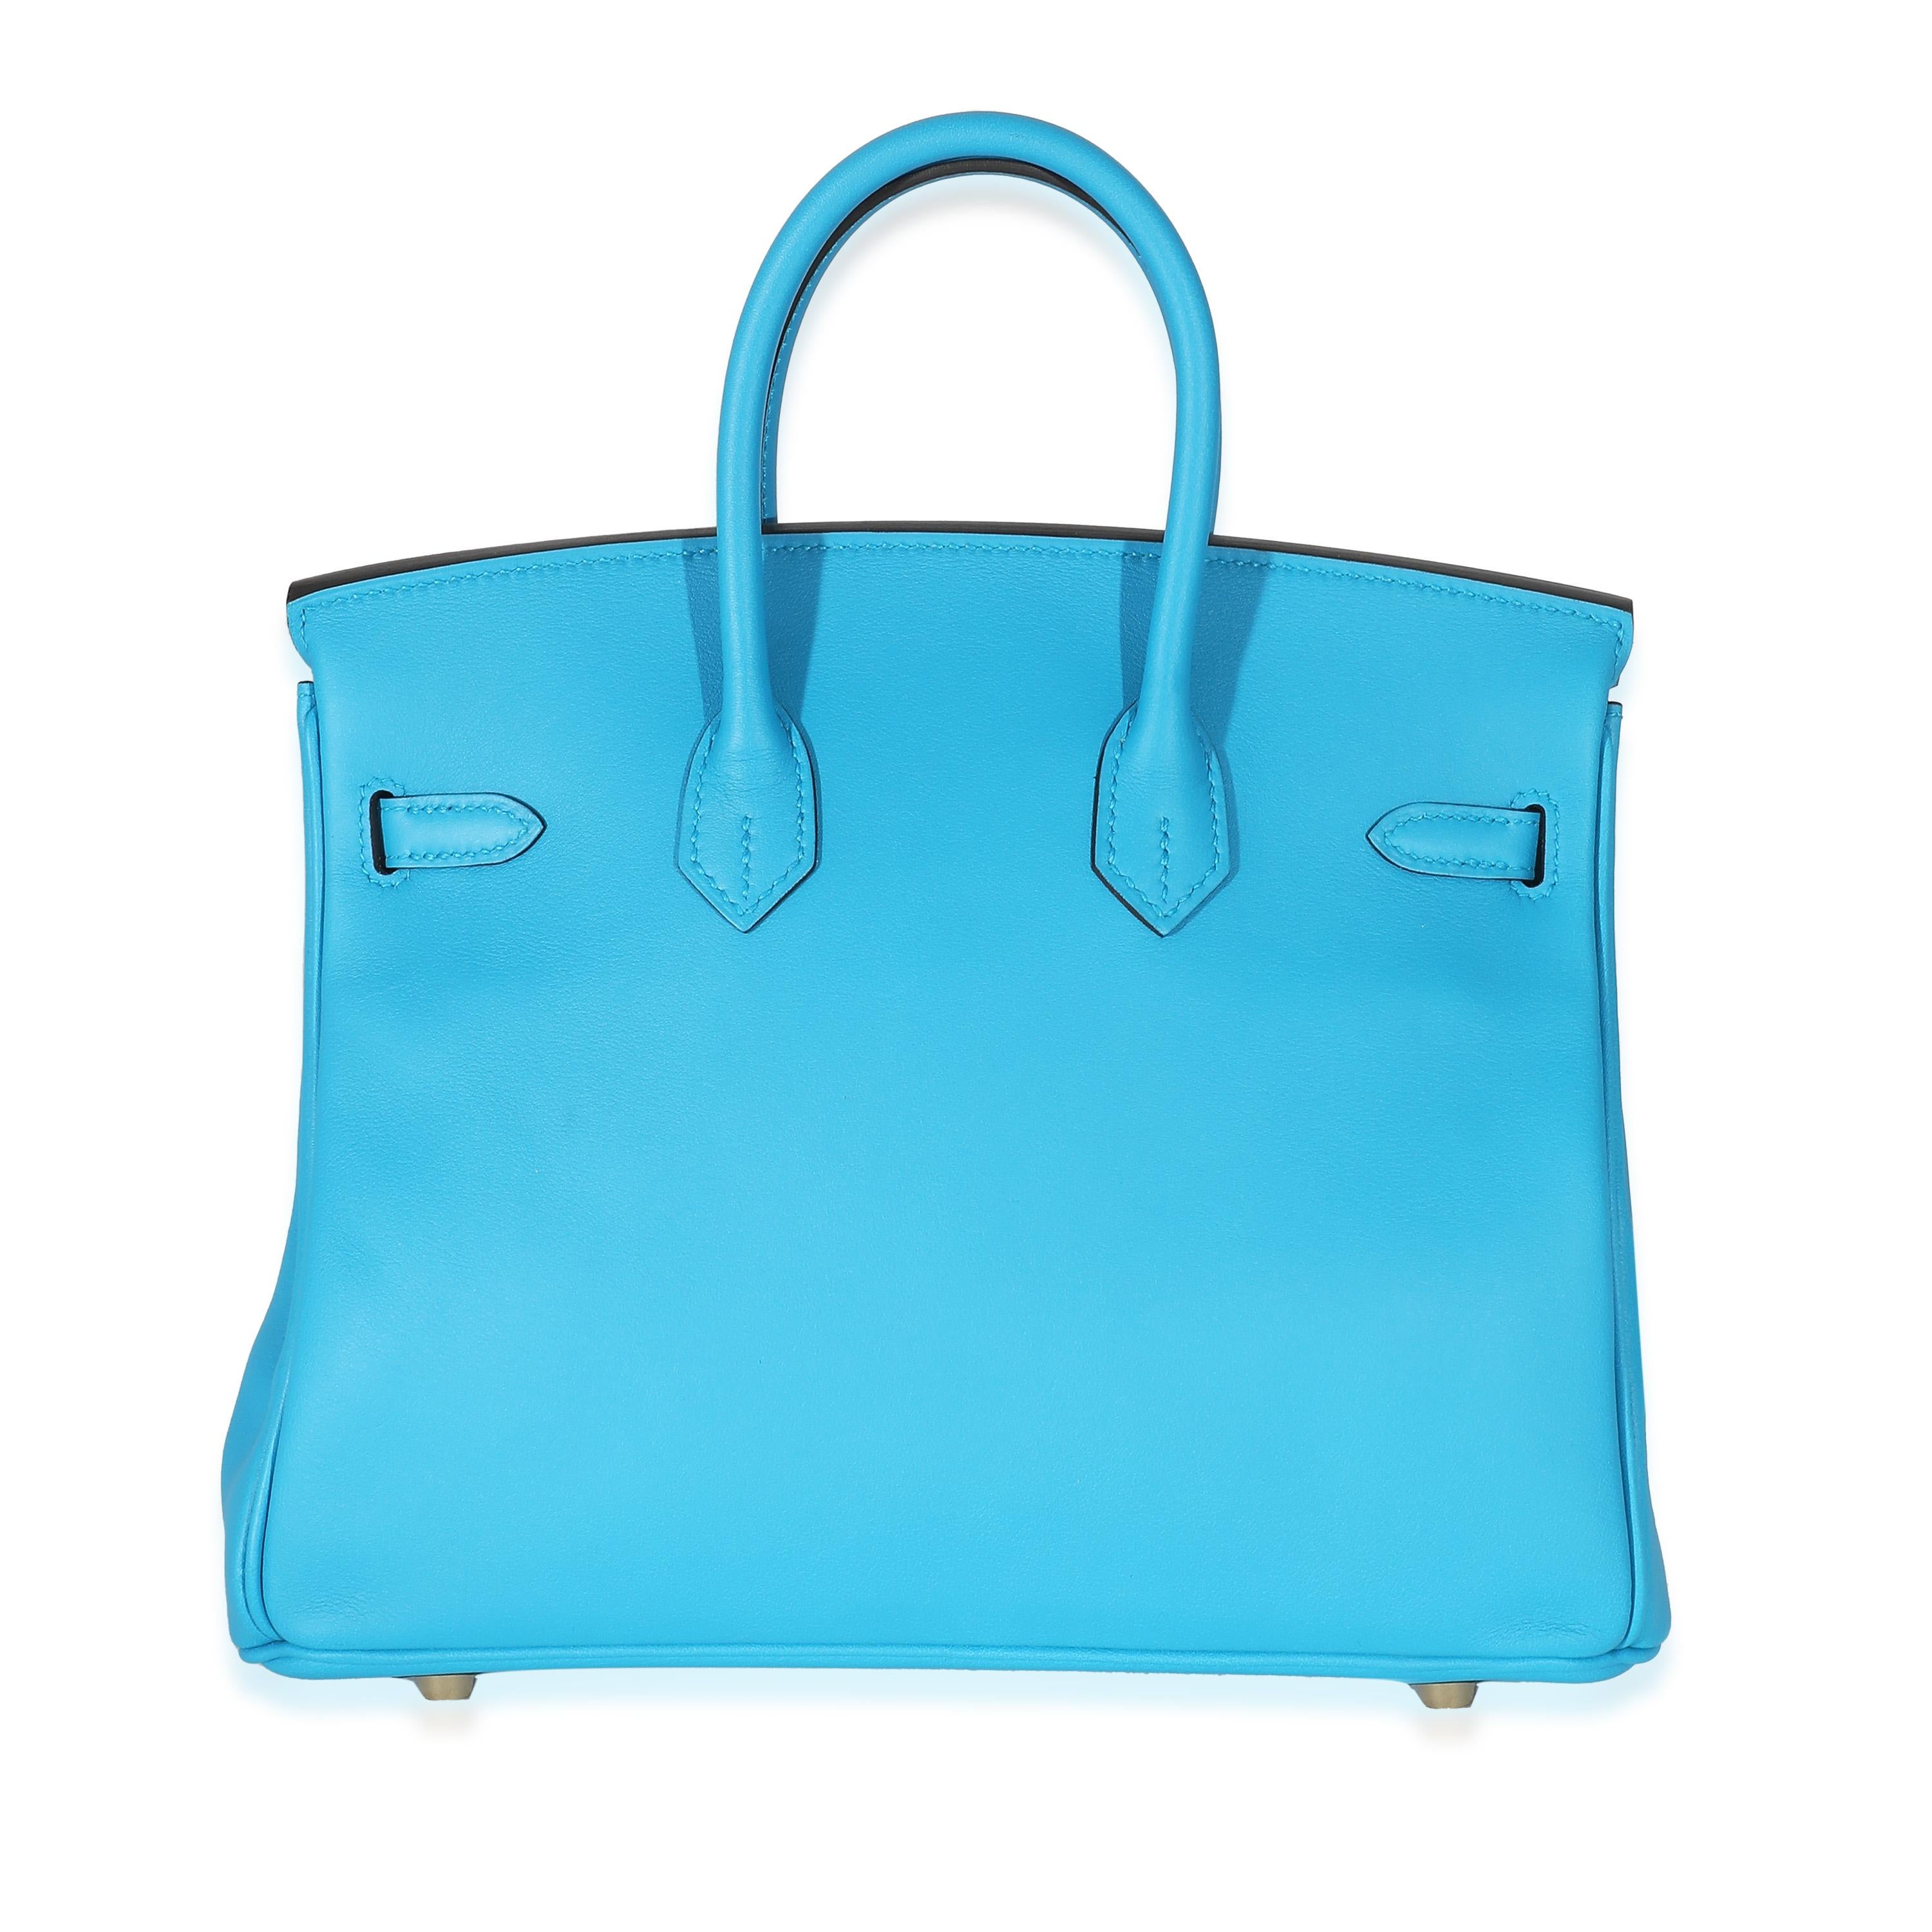 Listing Title: Hermès Bleu Zanzibar Swift Birkin 25 GHW
SKU: 133615
Condition: Pre-owned 
Handbag Condition: Excellent
Condition Comments: Item is in excellent condition and displays light signs of wear. Faint exterior scuffing.
Brand: Hermès
Model: